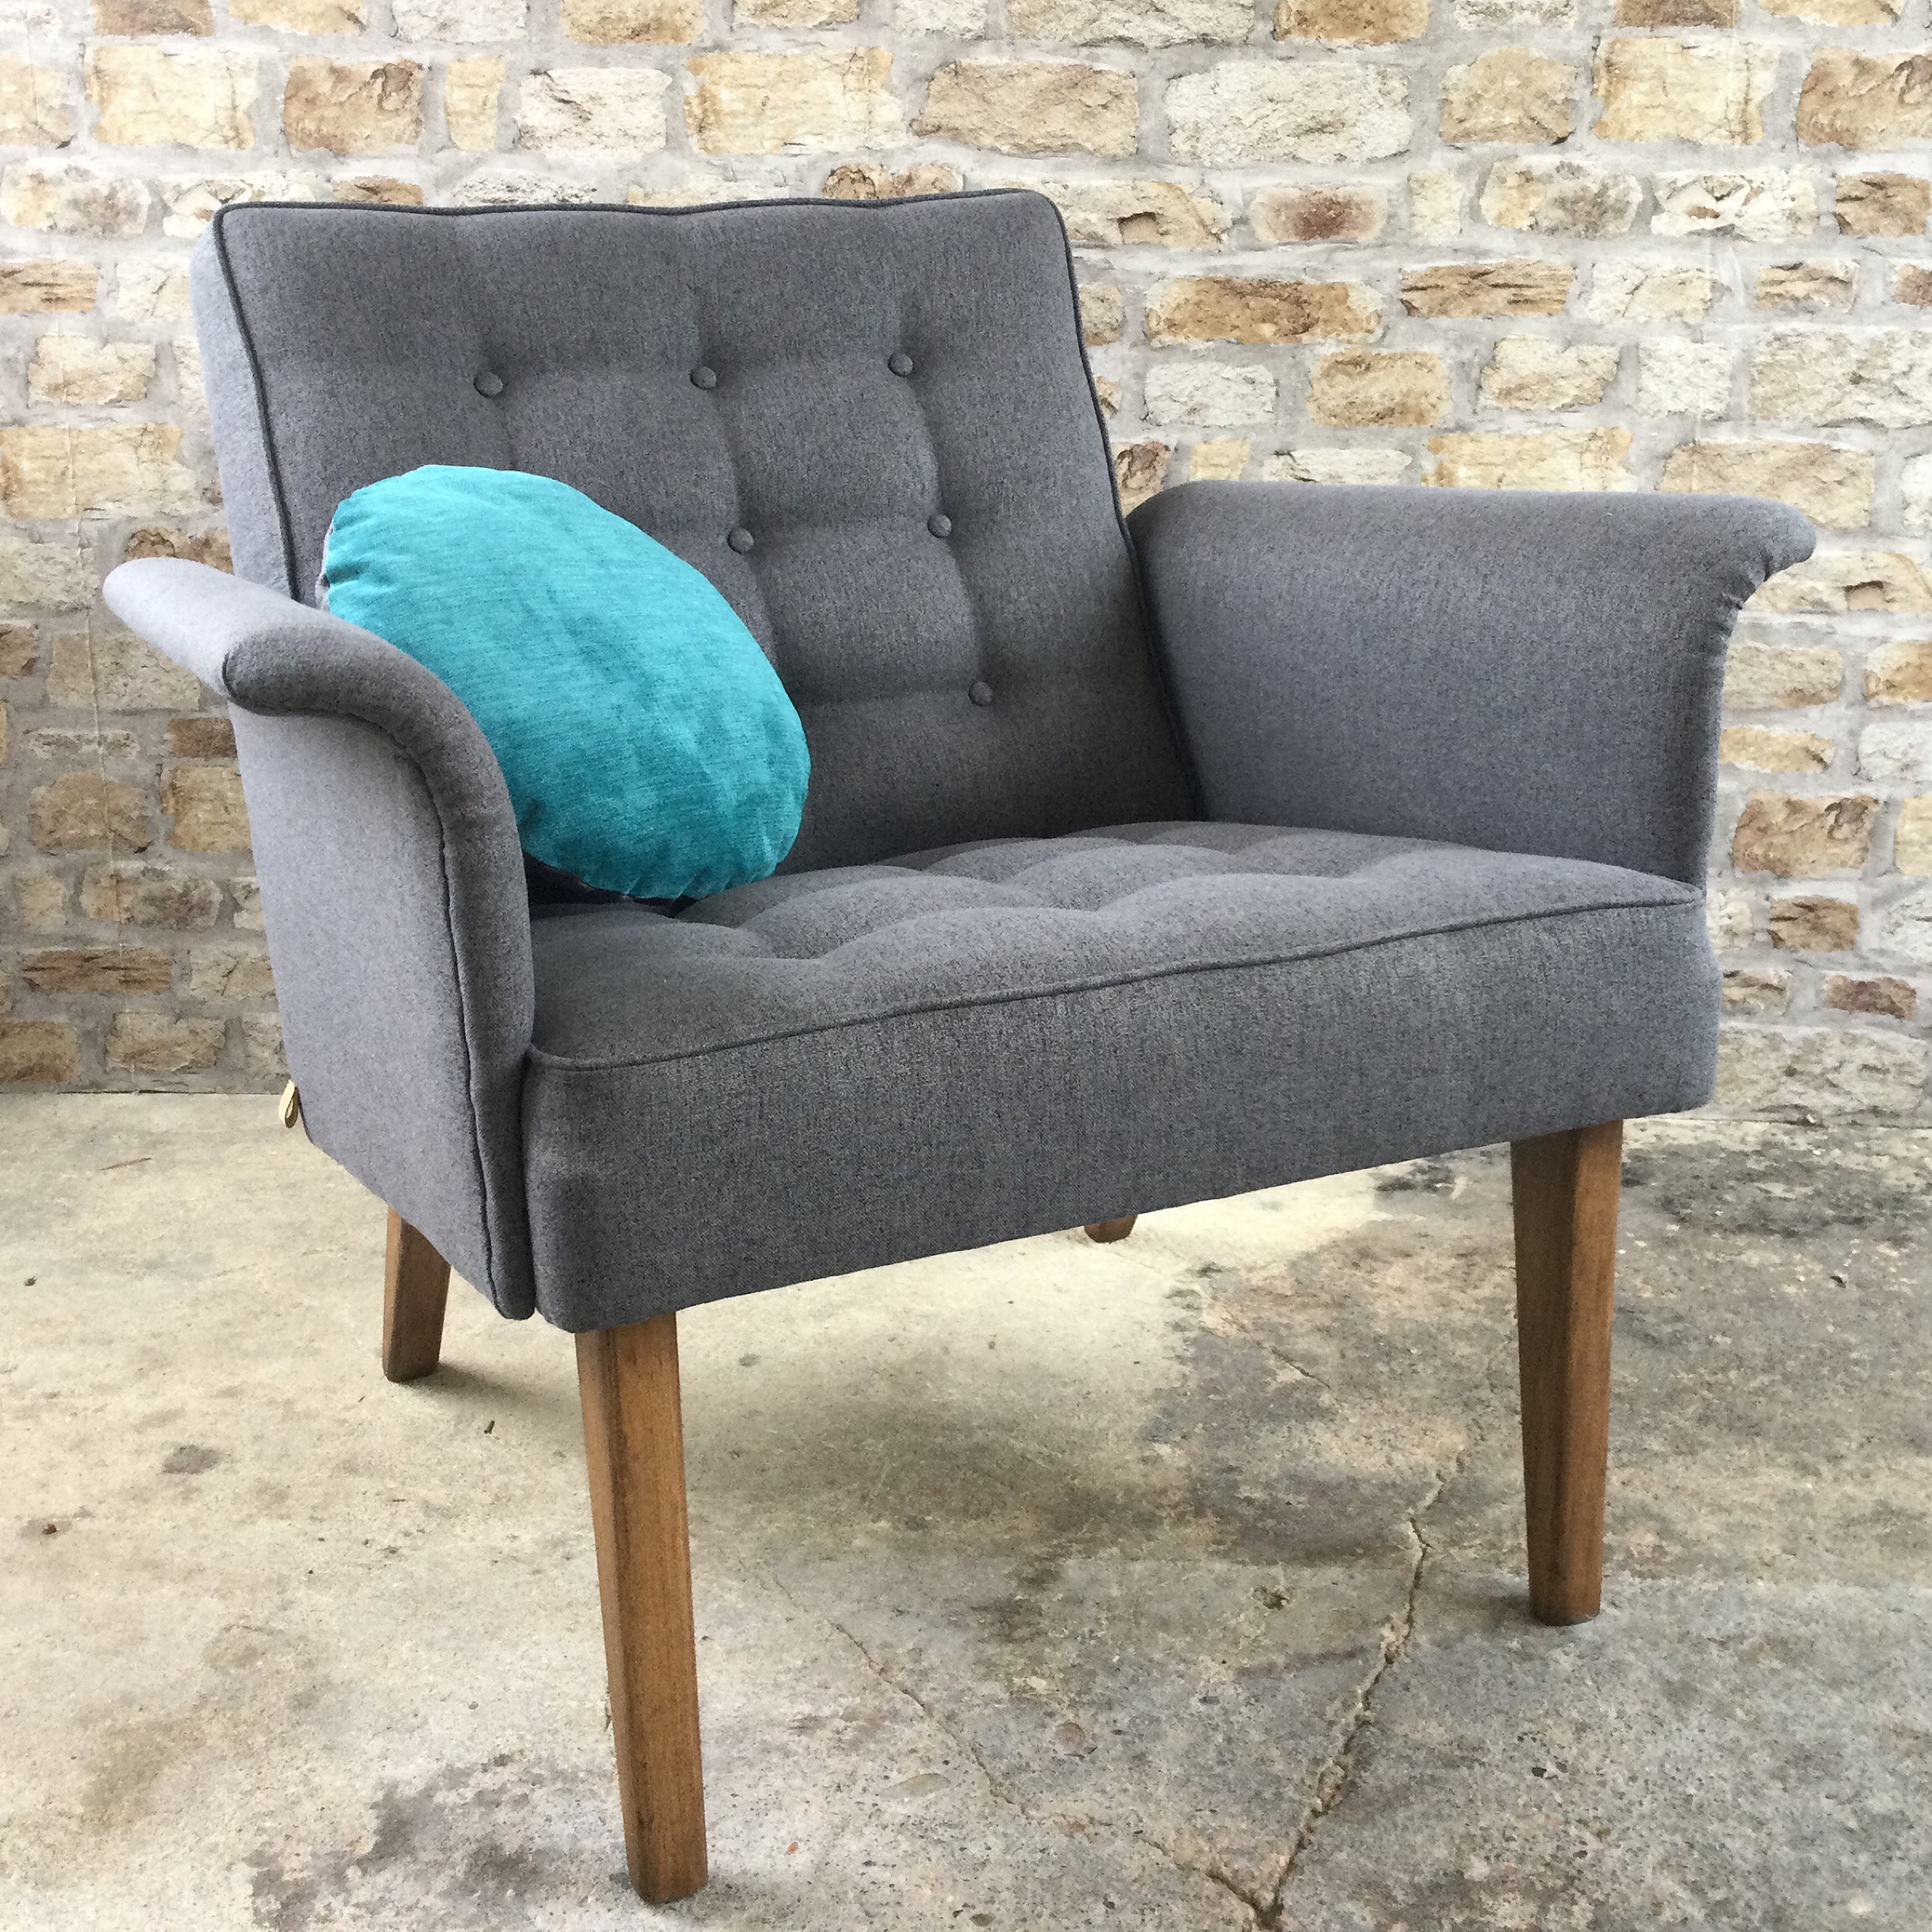 Retro 1970’s Lounge Chair in Grey